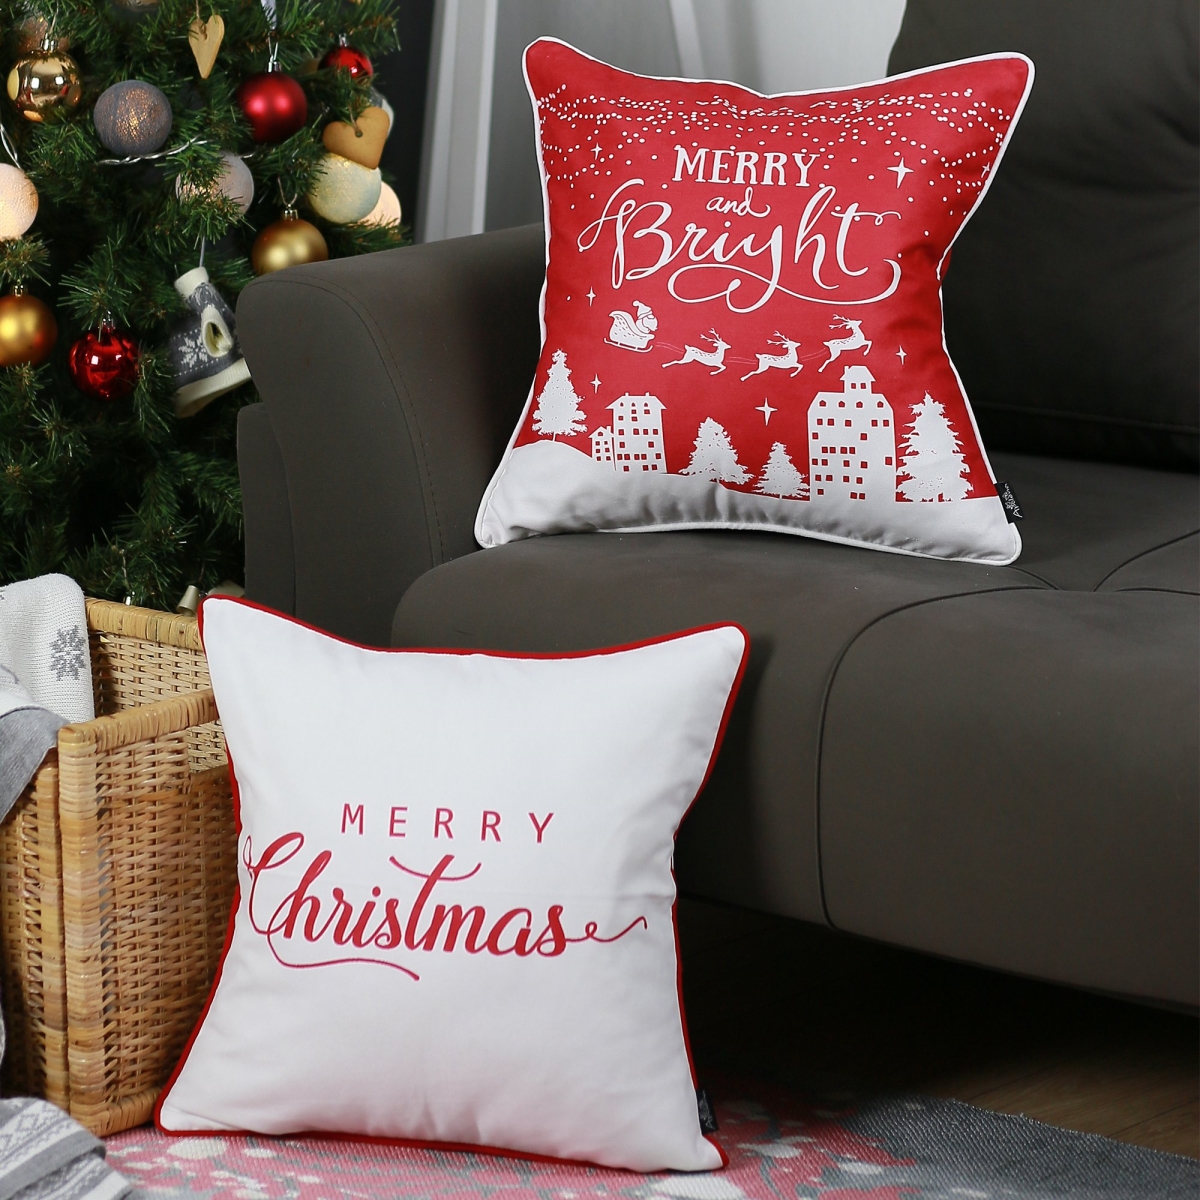 Picture of HomeRoots 376898 18 in. Merry Christmas Throw Pillow Cover in Multi Color - Set of 2